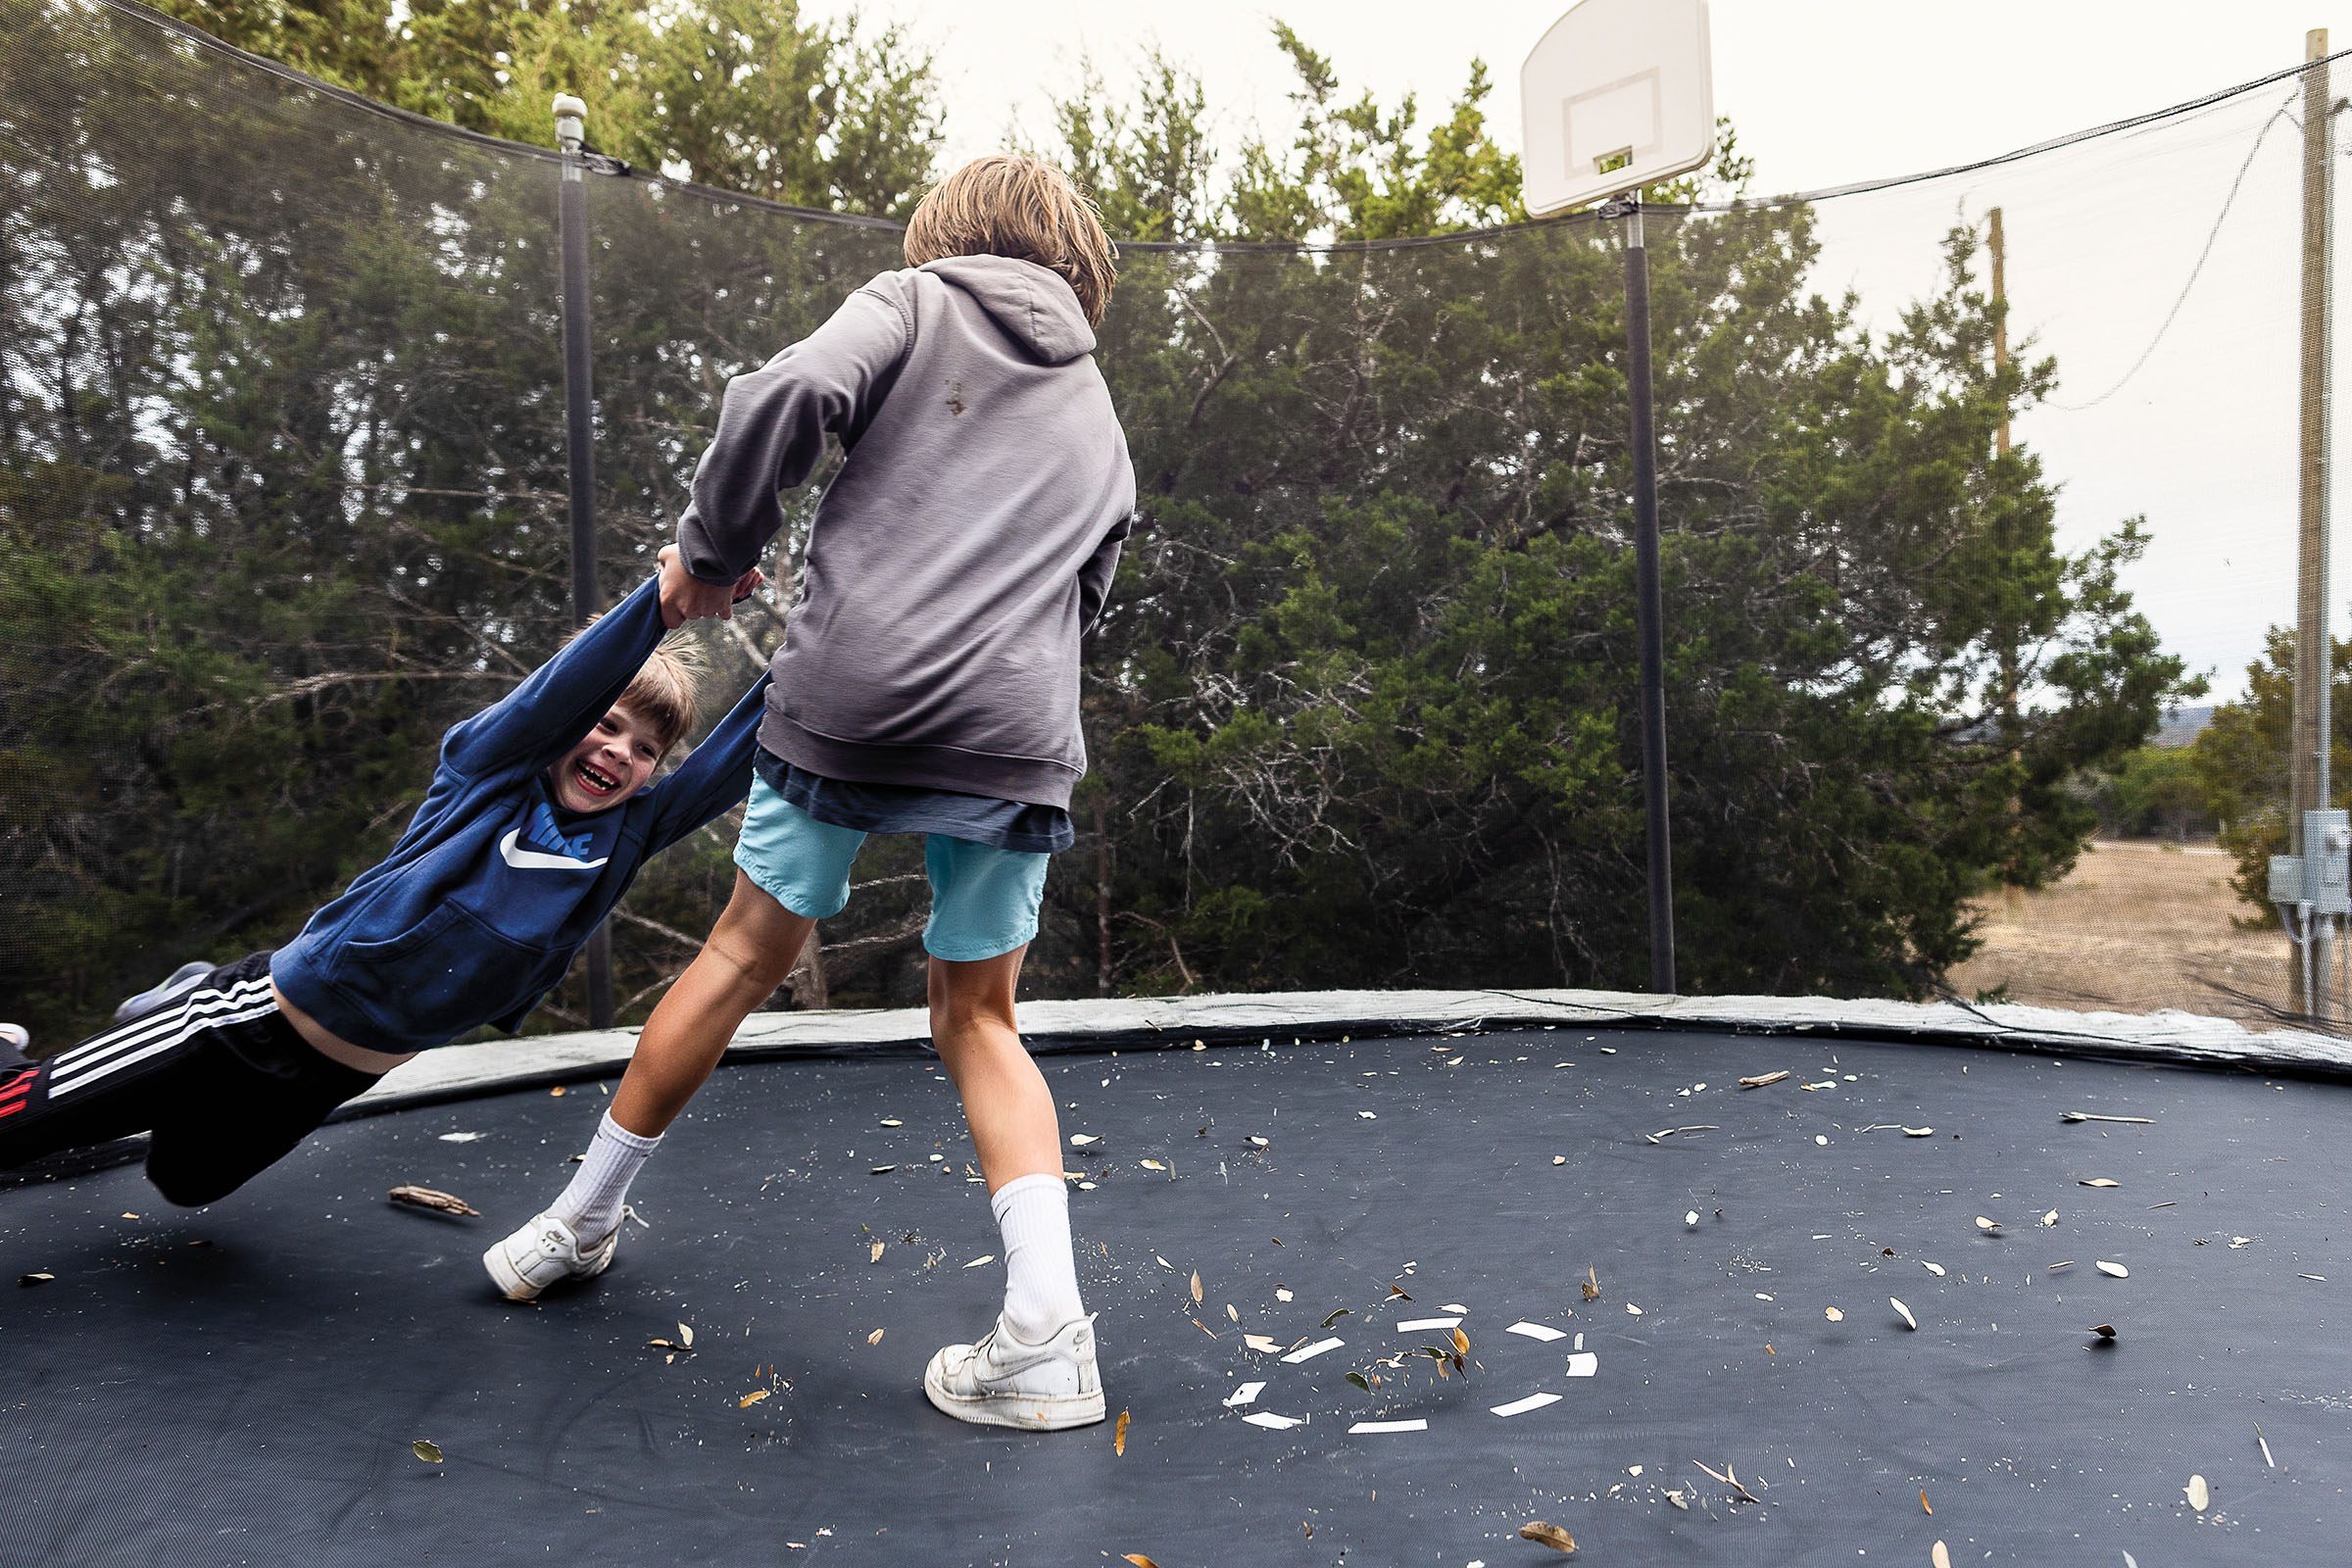 A picture of a young man swinging another young man around on a trampoline